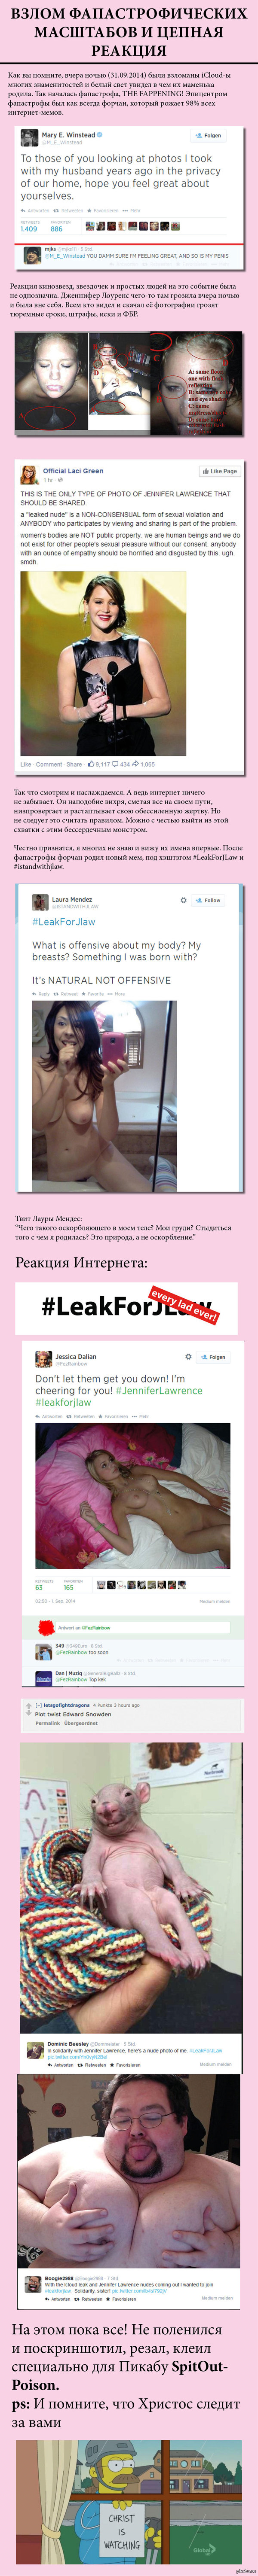 The Fappanning - NSFW, The fappening, Icloud, Jennifer Lawrence, Forchan, 4chan, Longpost